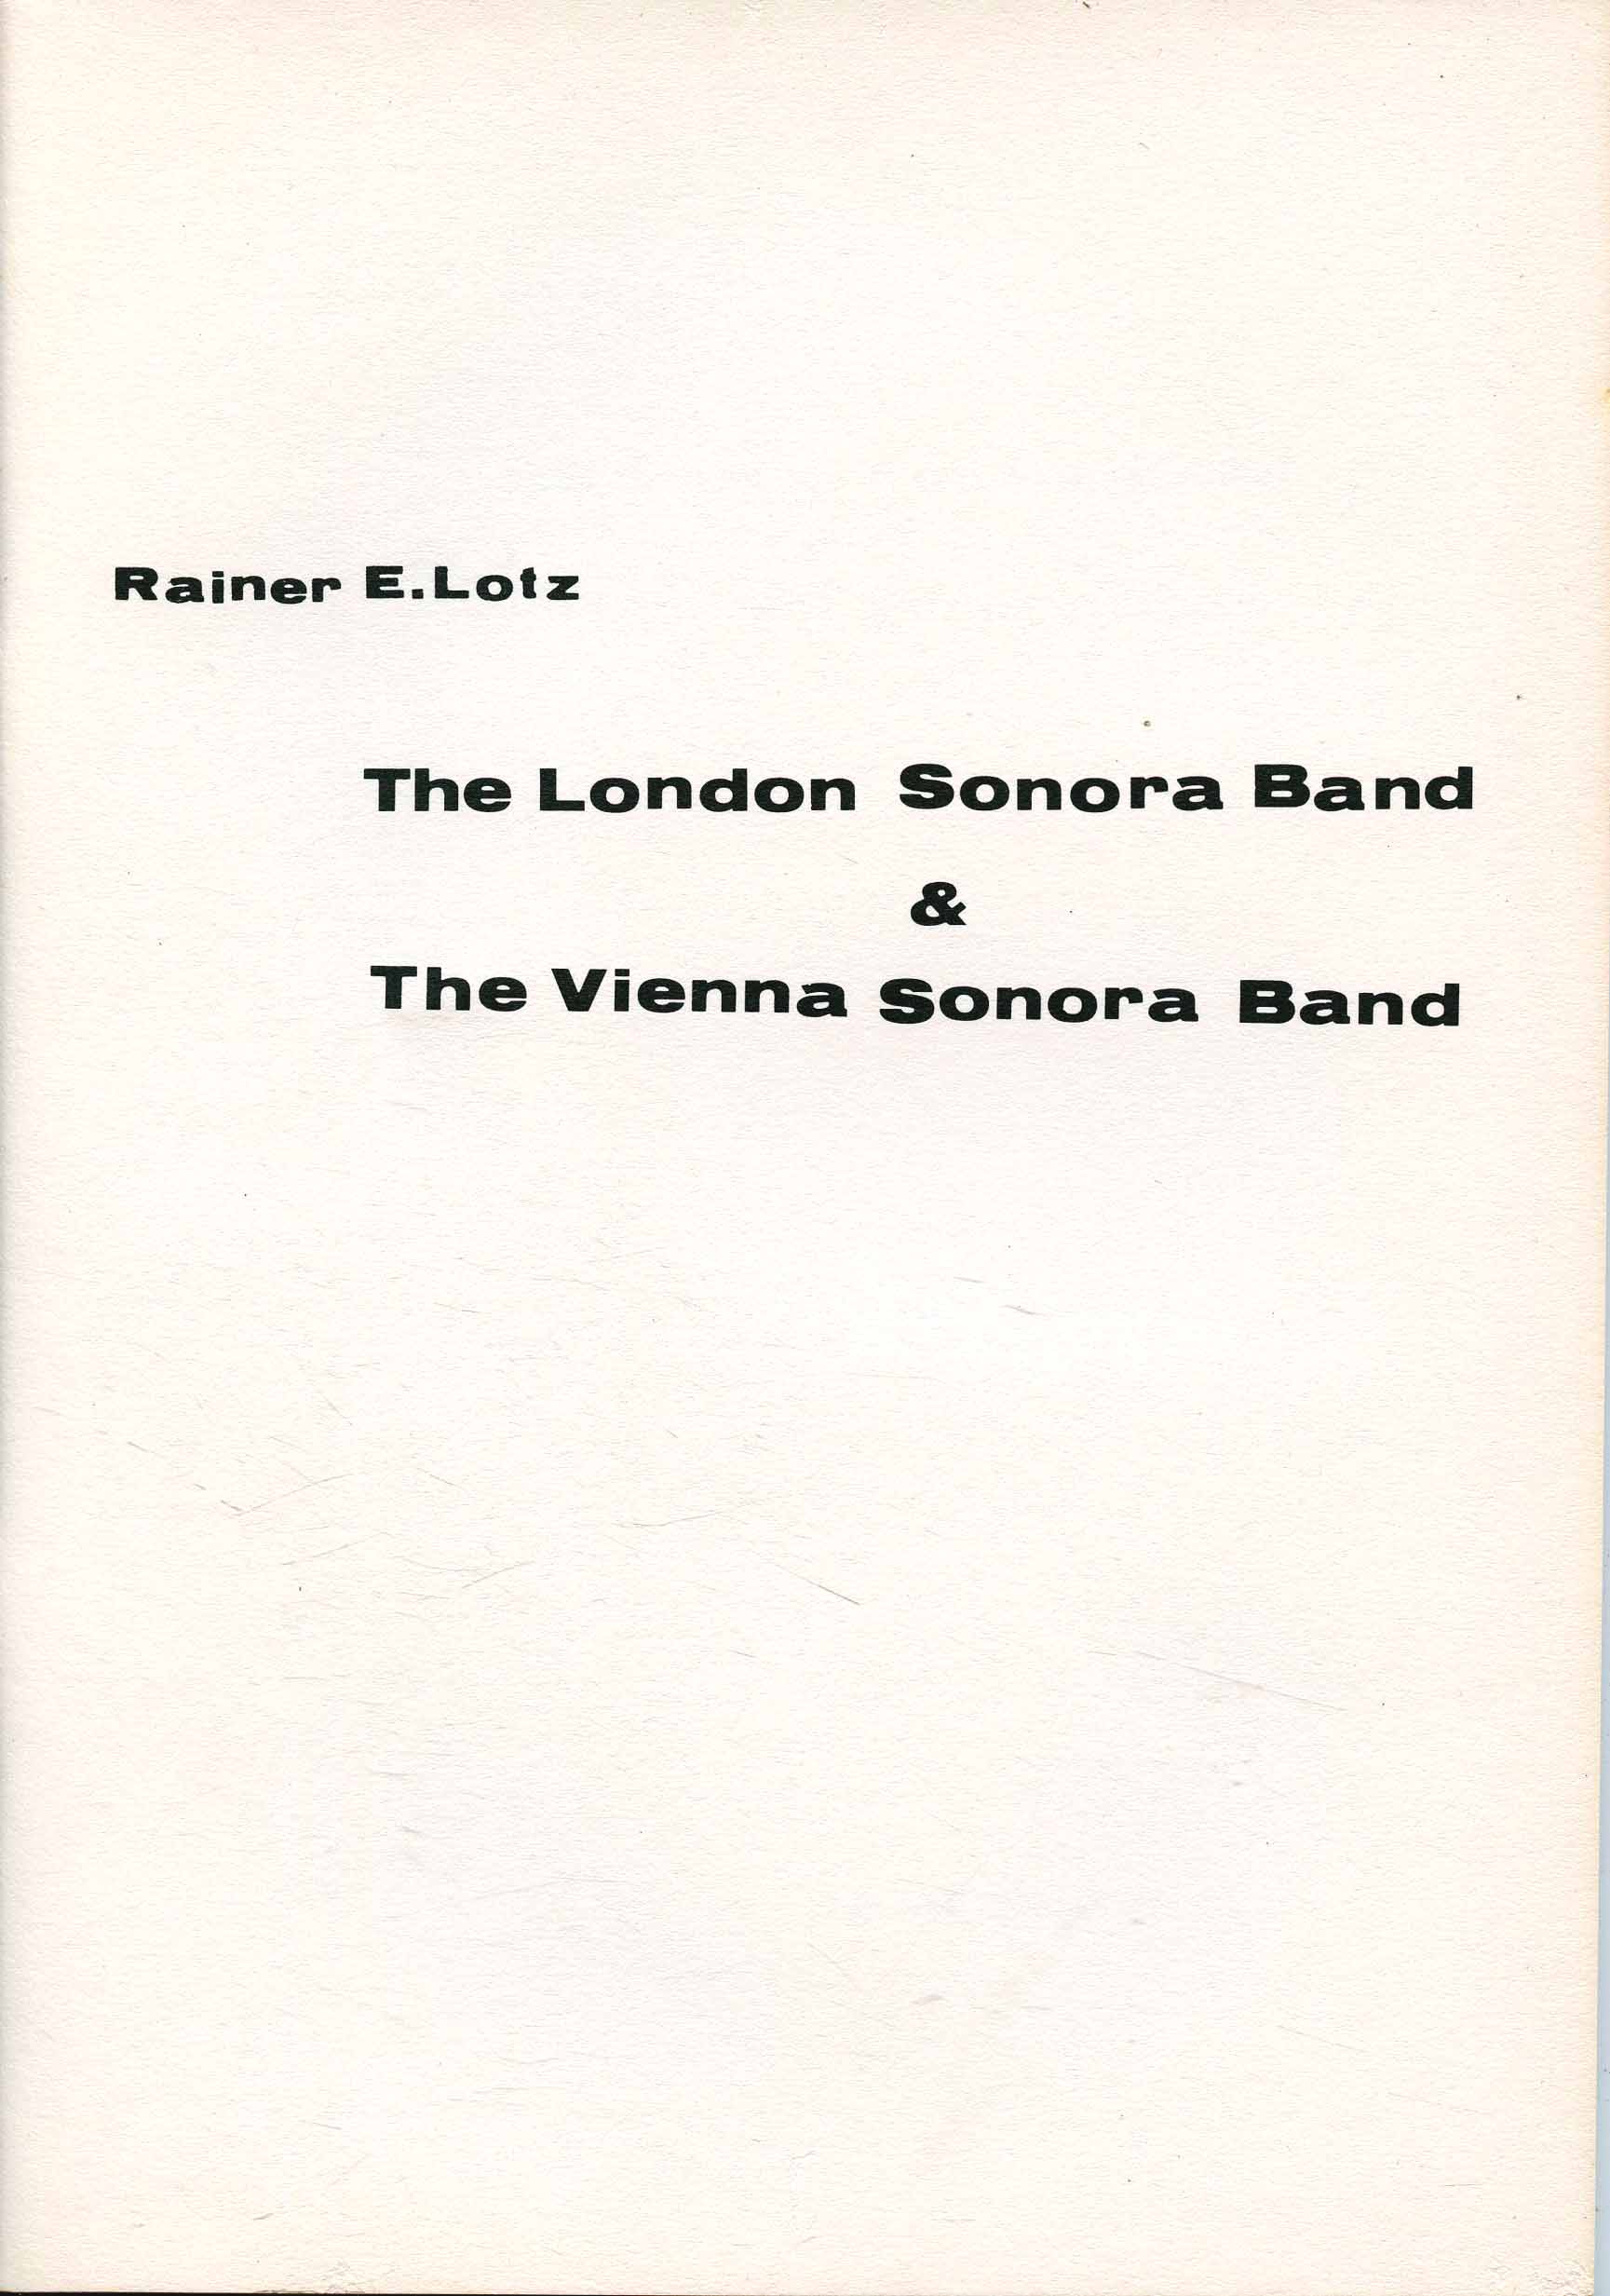 The London & Vienna Sonora Bands